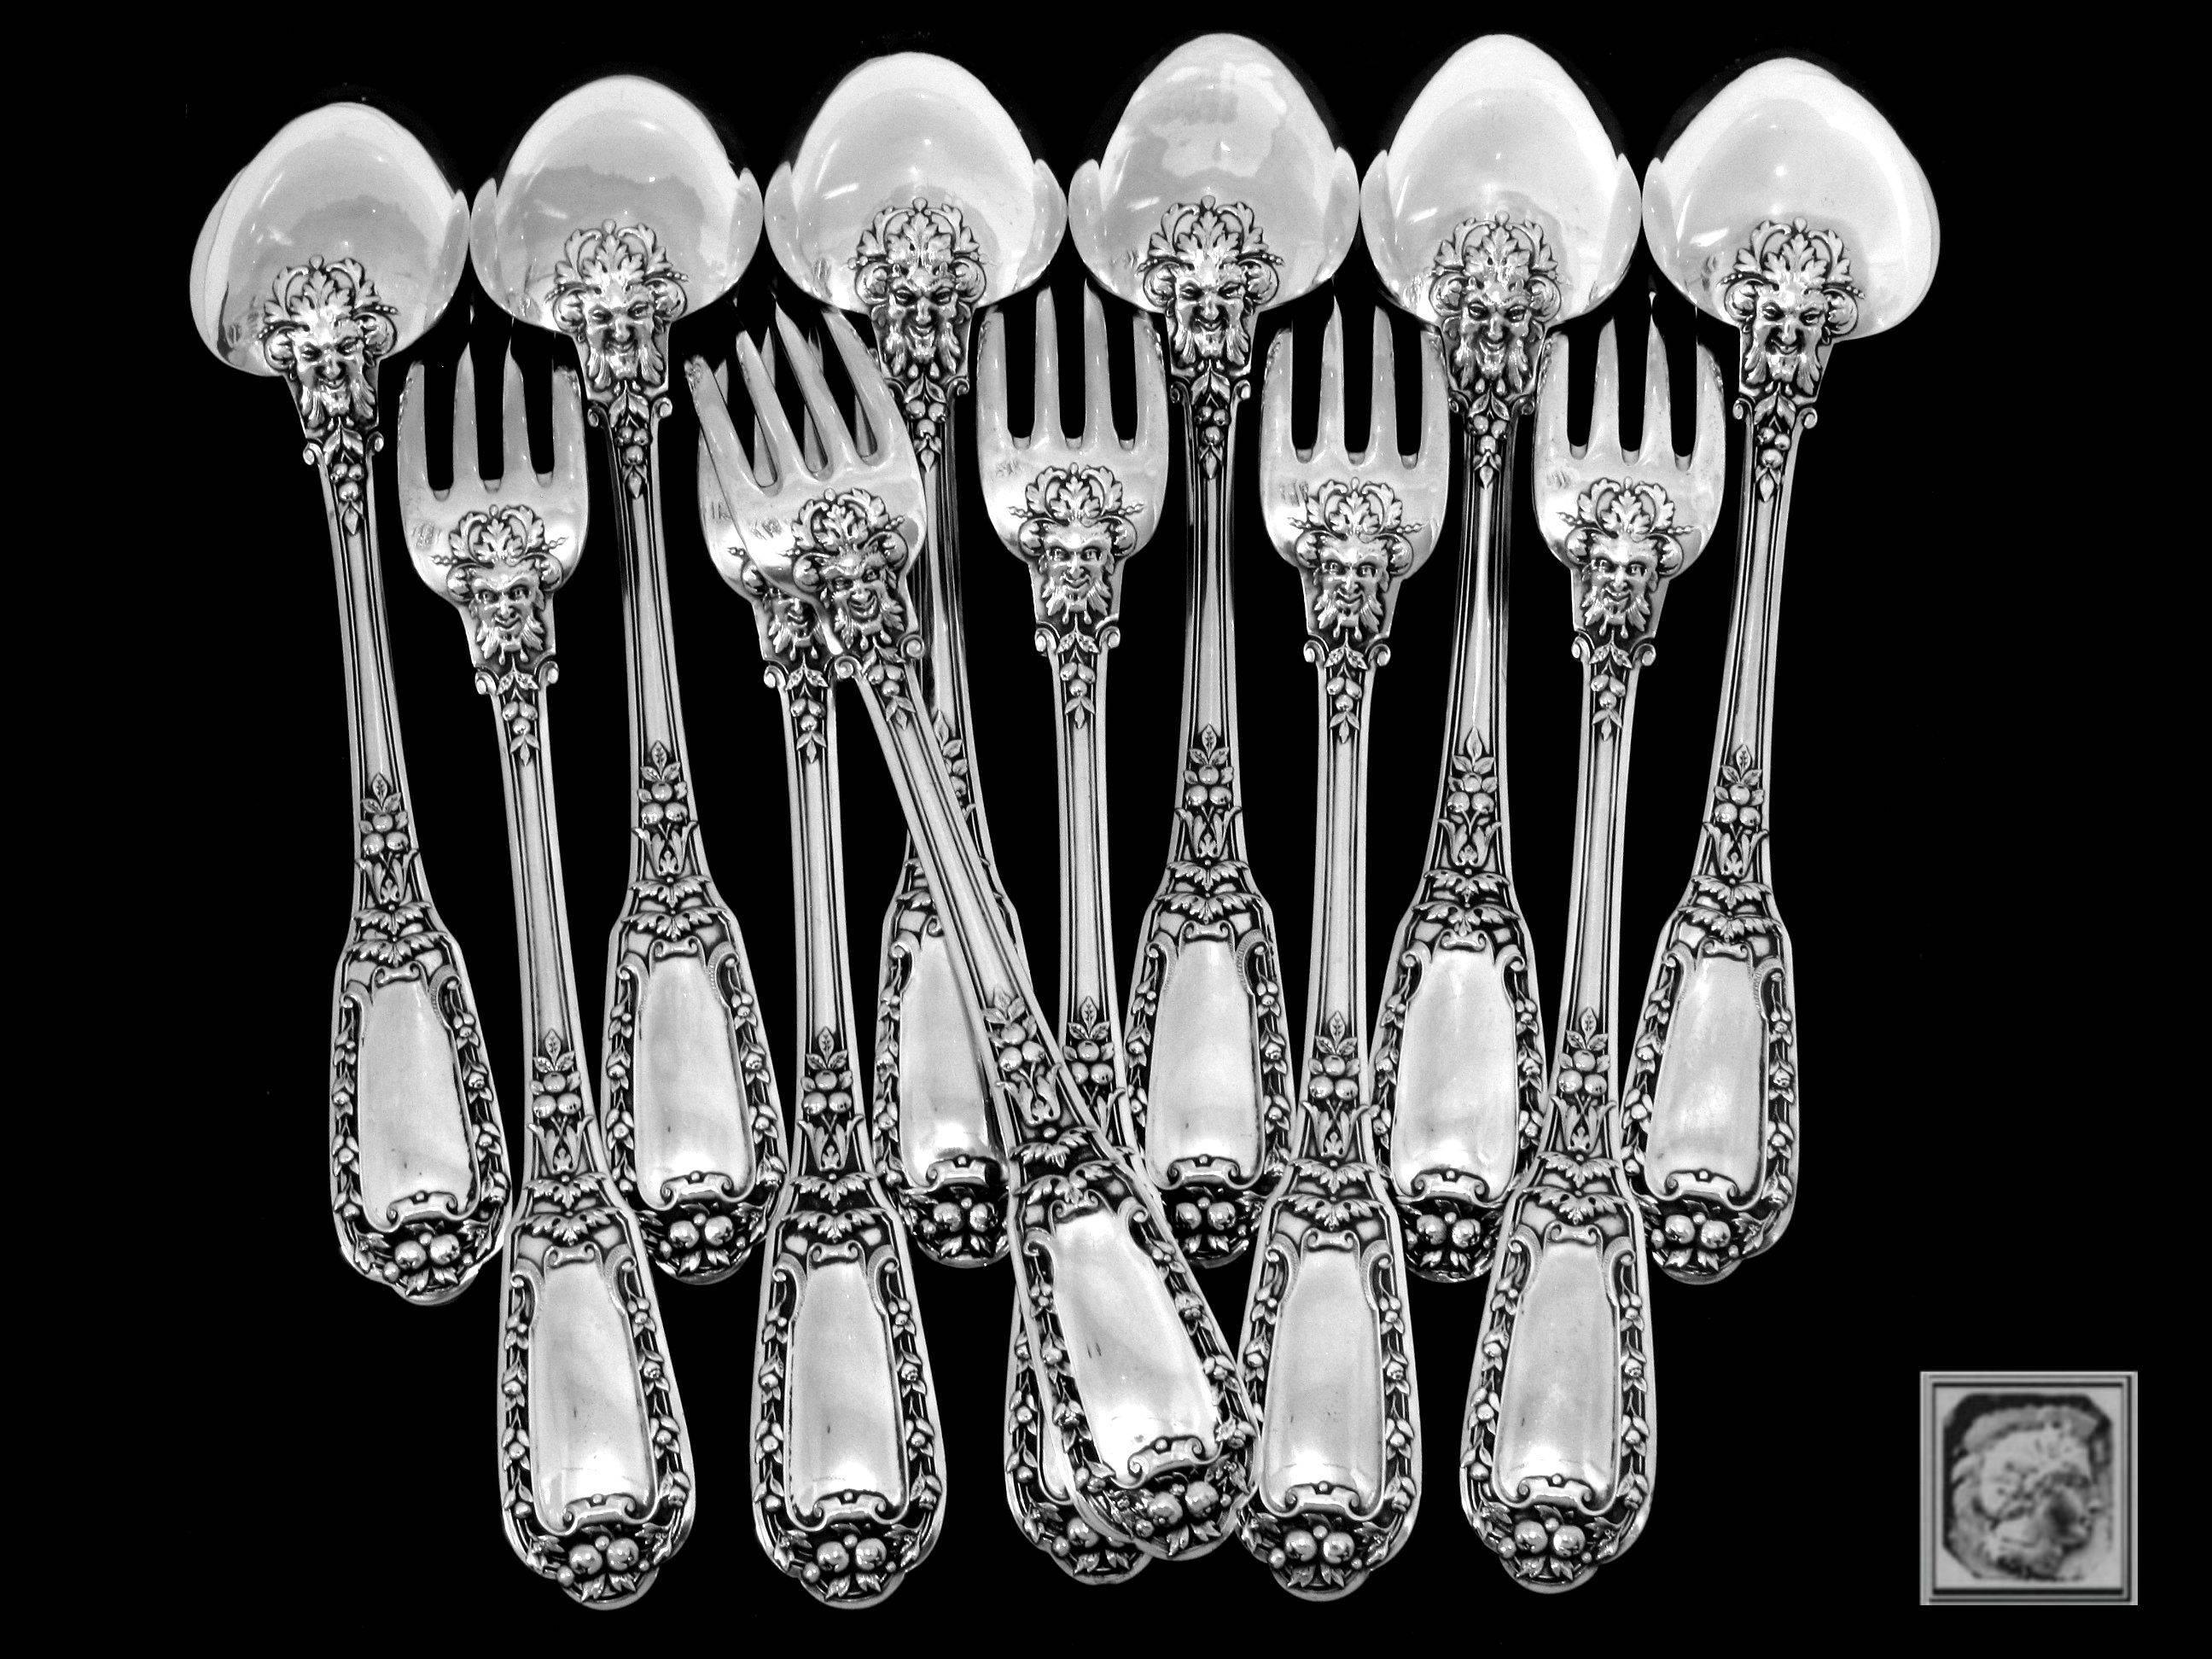 Soufflot Gorgeous French Sterling Silver Dinner Flatware Set 12 pc Mascarons For Sale 2